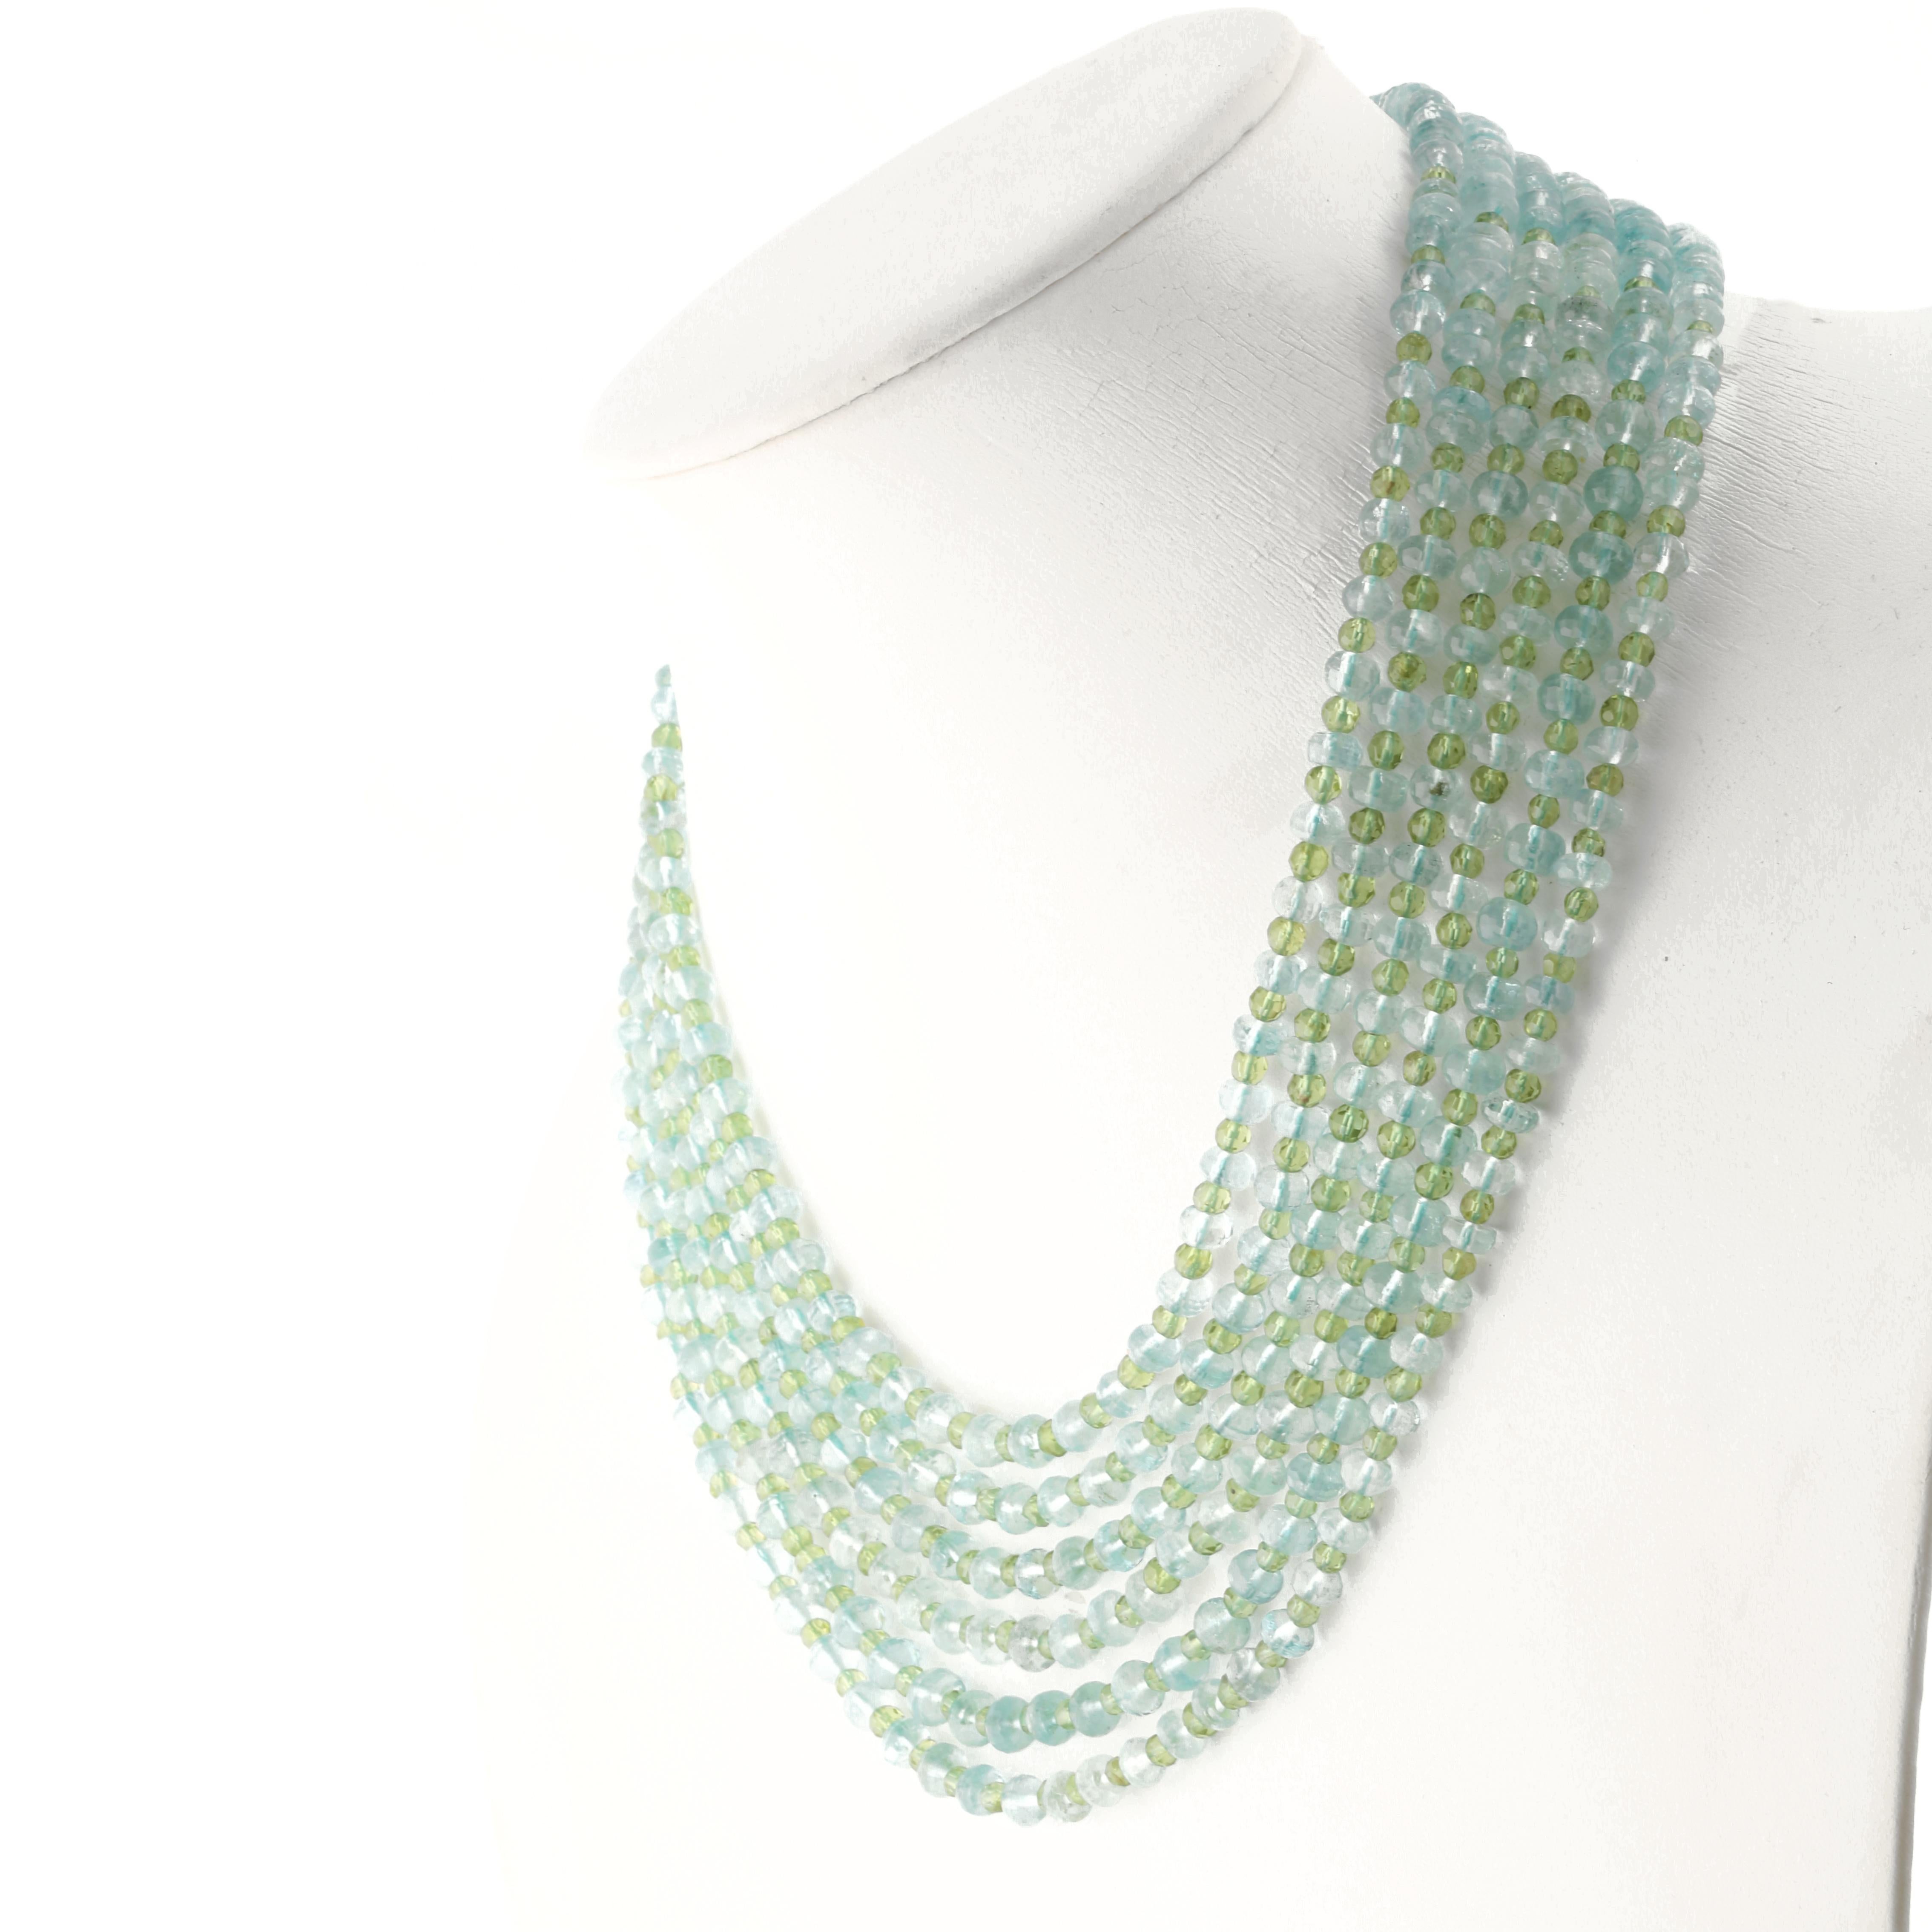 Timeless elegance for a unique piece multi-strand necklace, featuring precious gemstones of the highest quality, set in a design that enhances the elegance and colour combination of the materials.

• 925 silver closure
• Aquamarine rondelles 6 mm
•